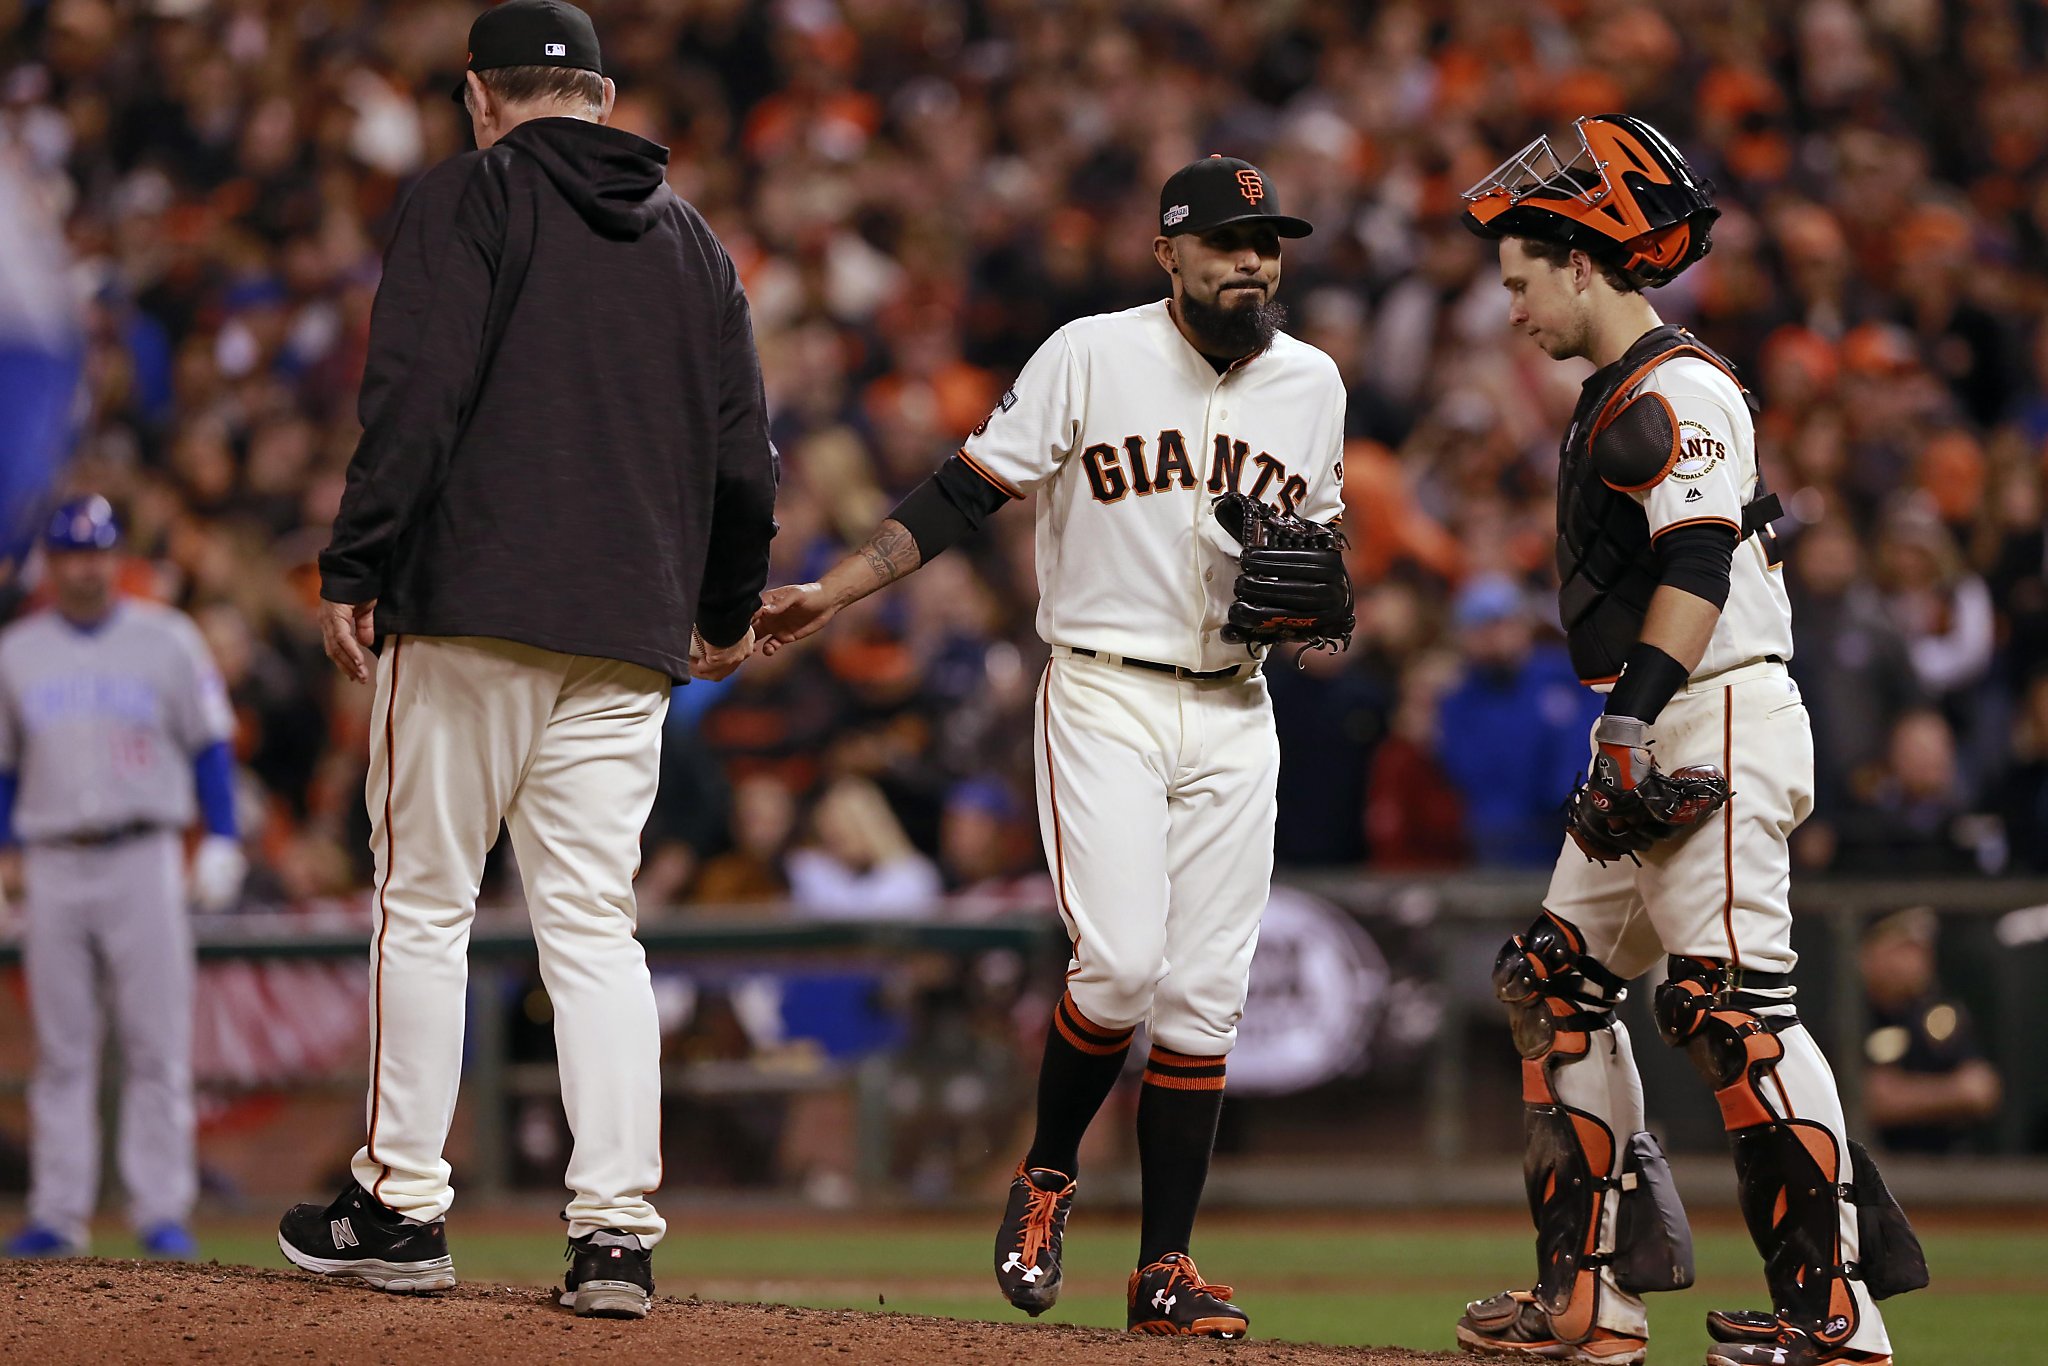 Giants' Game 4 loss marks end of an era